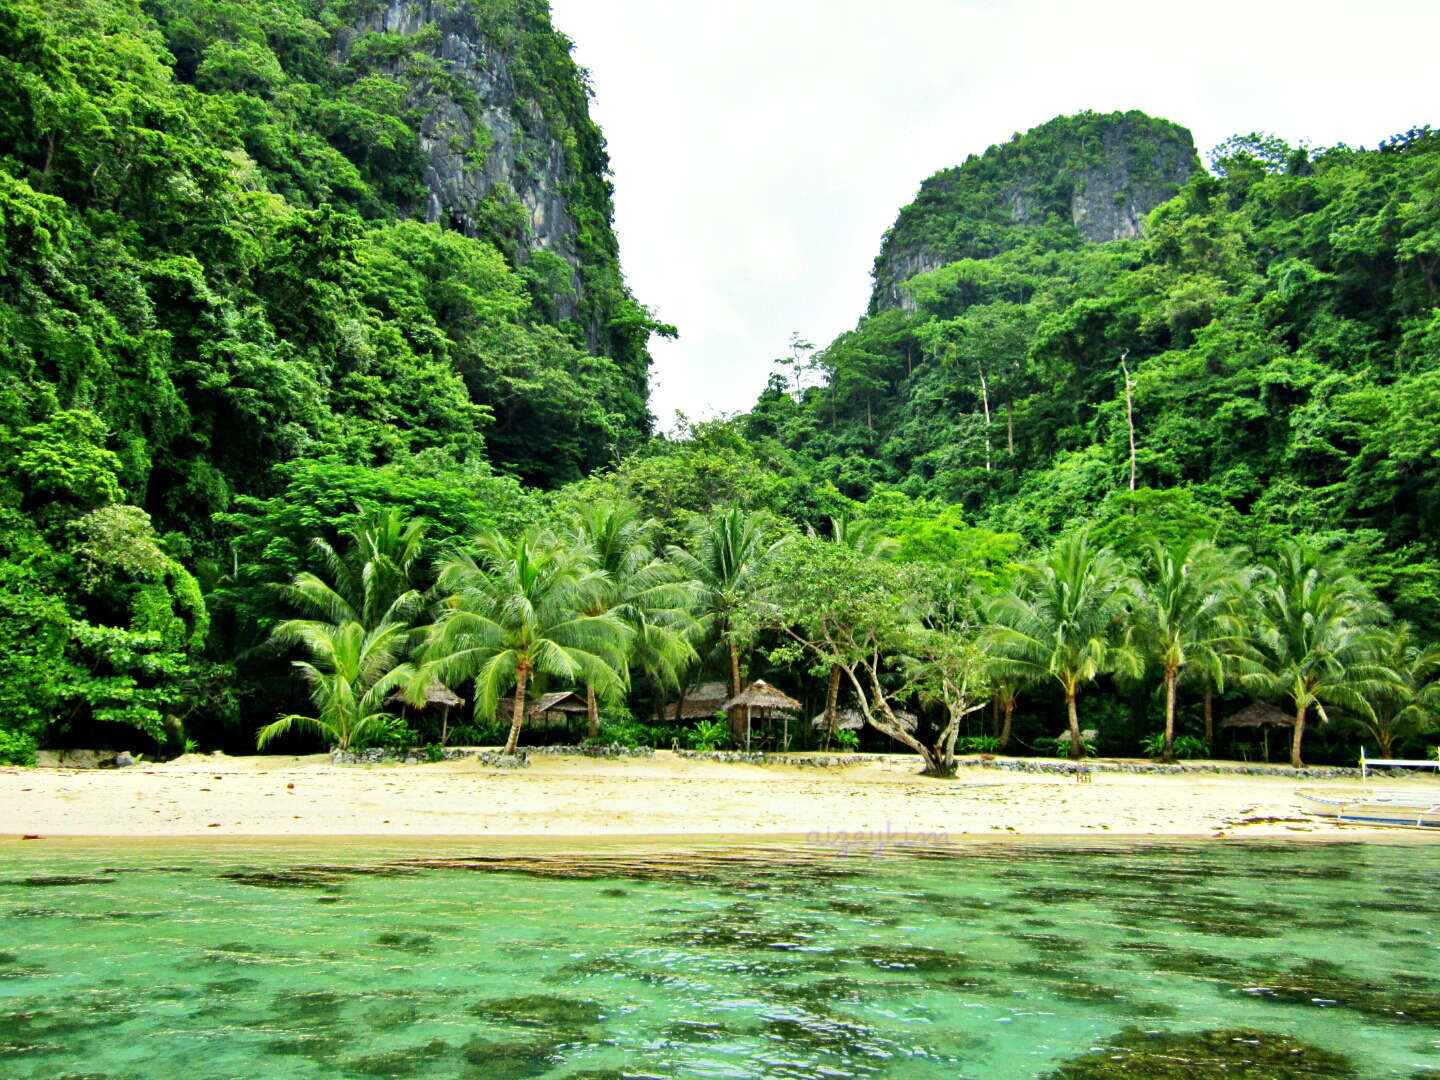 Beaches in the Philippines